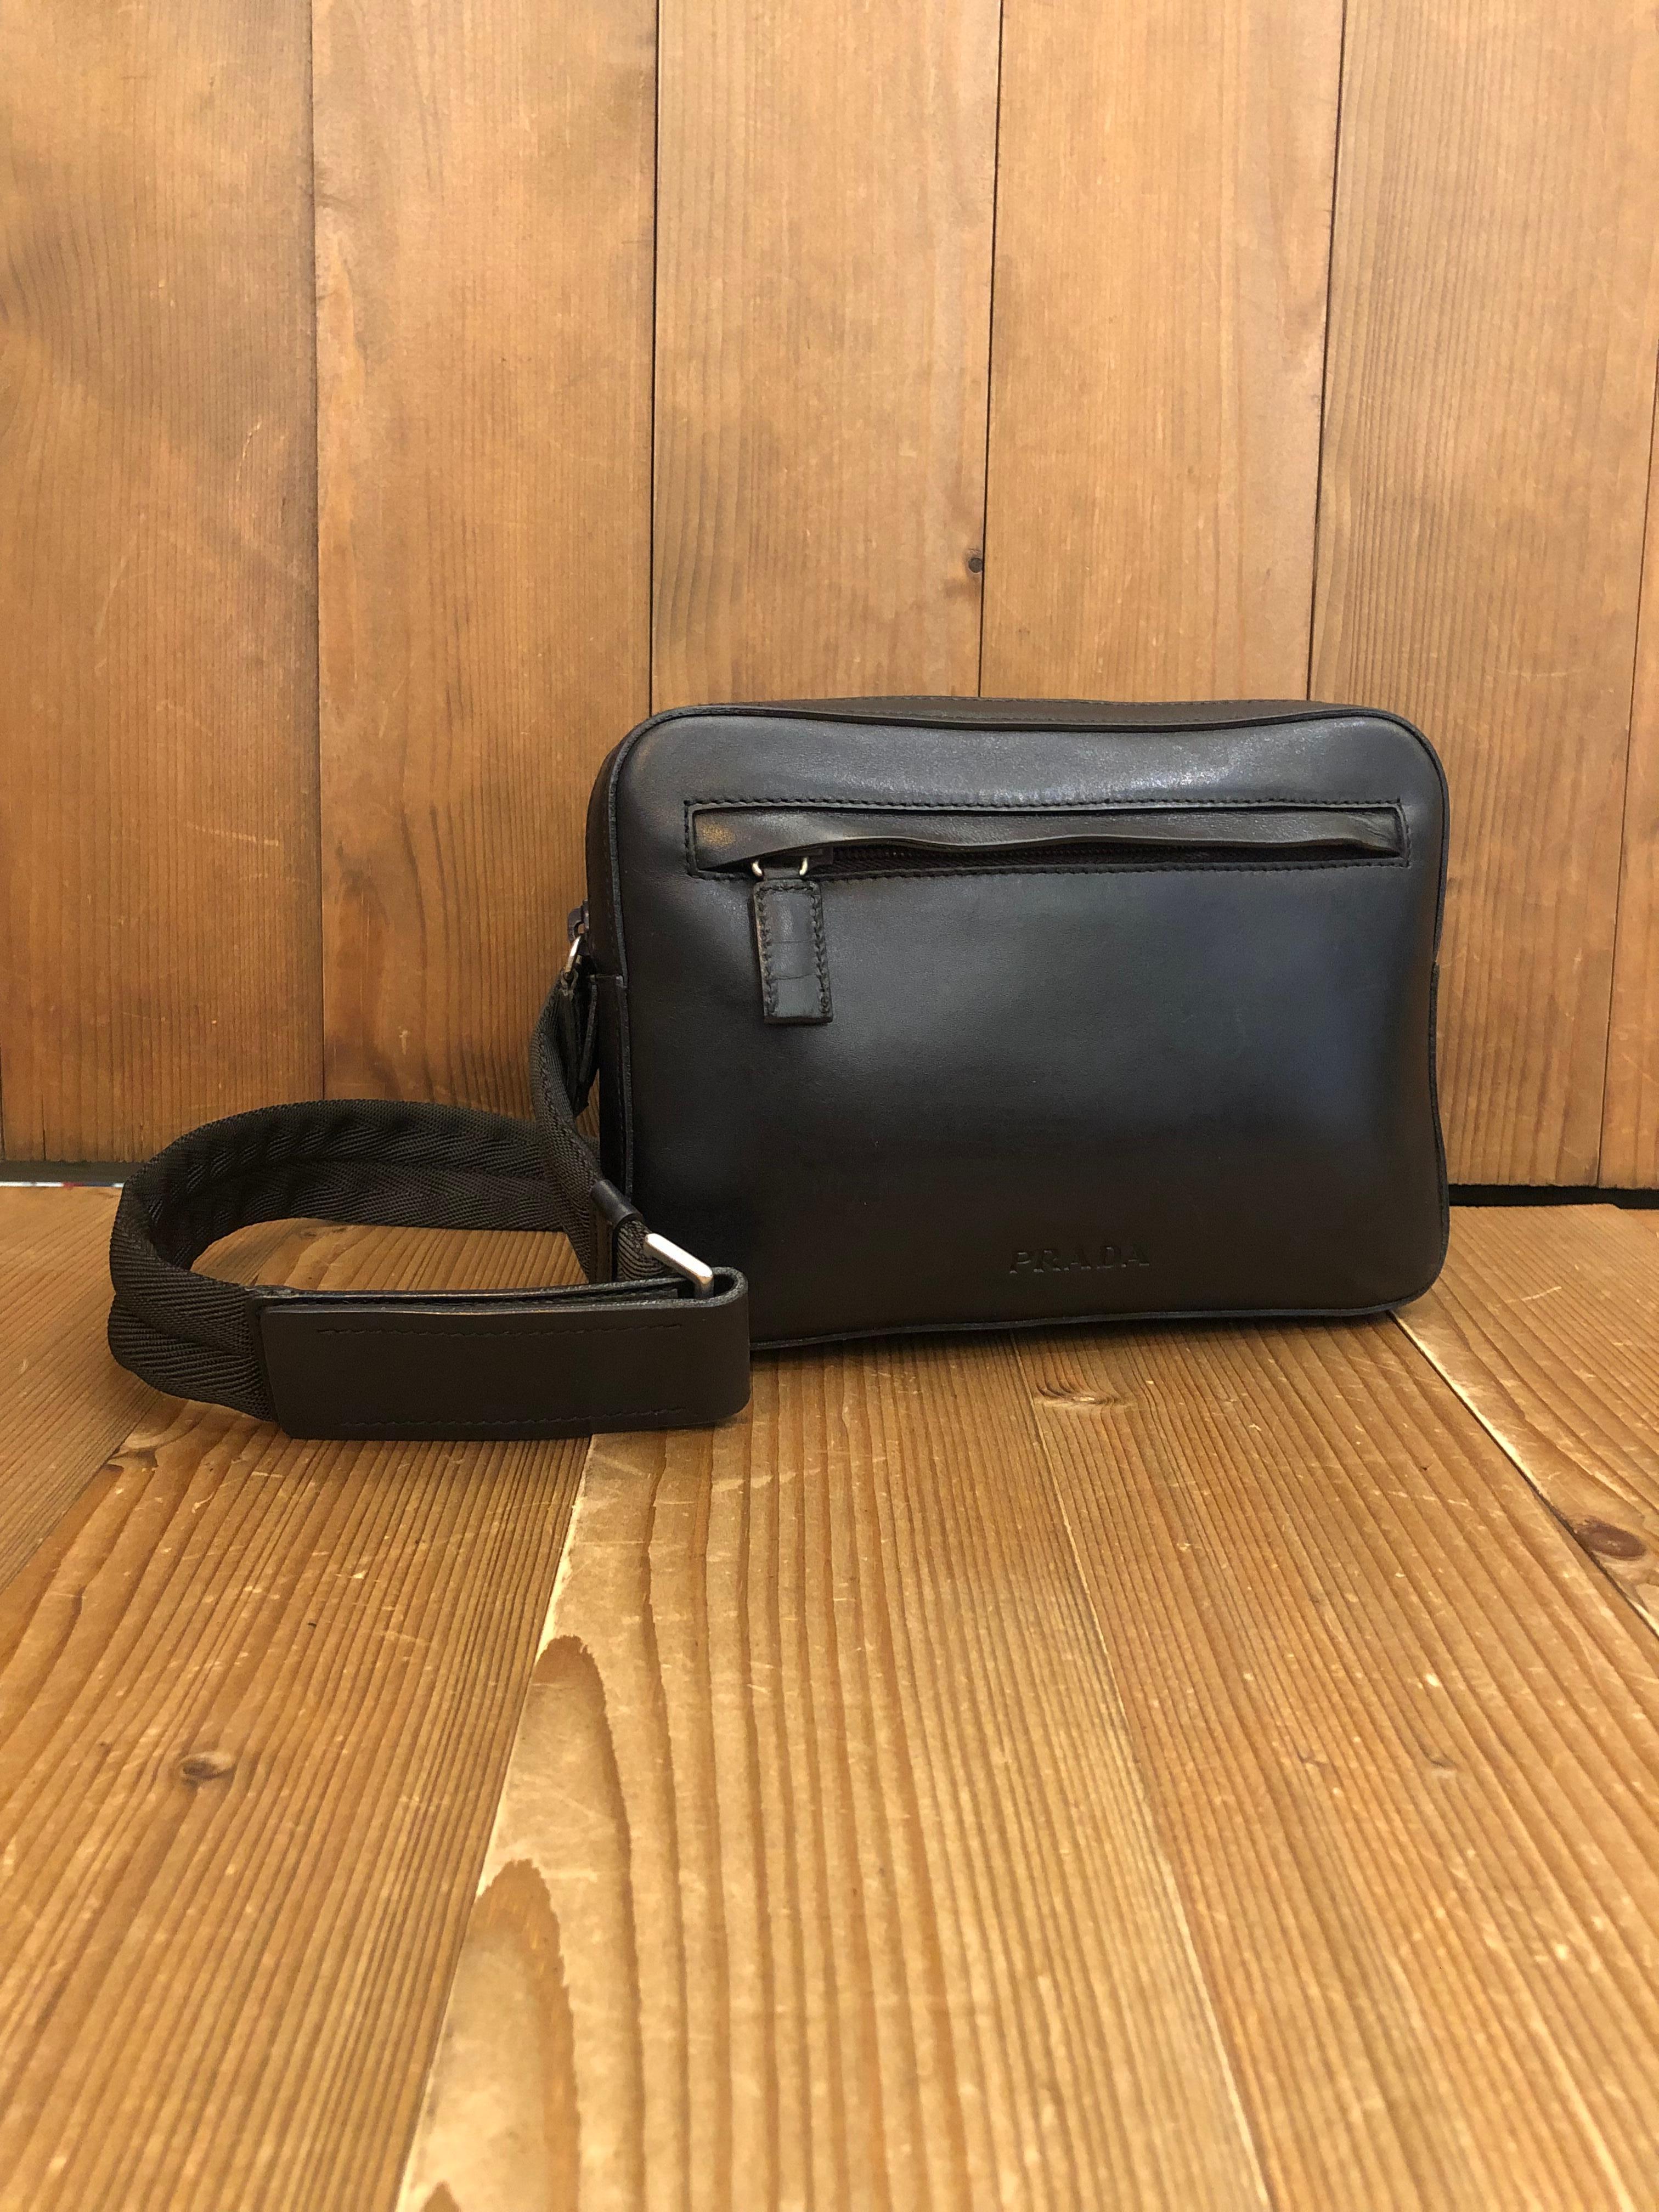 This vintage PRADA belt bag is crafted of calfskin leather in black featuring a front front zippered pocket. Top zipper closure opens to a black jacquard interior. Made in Italy. Detachable belt with Velcro closure. Bag measures approximately 8 x 6